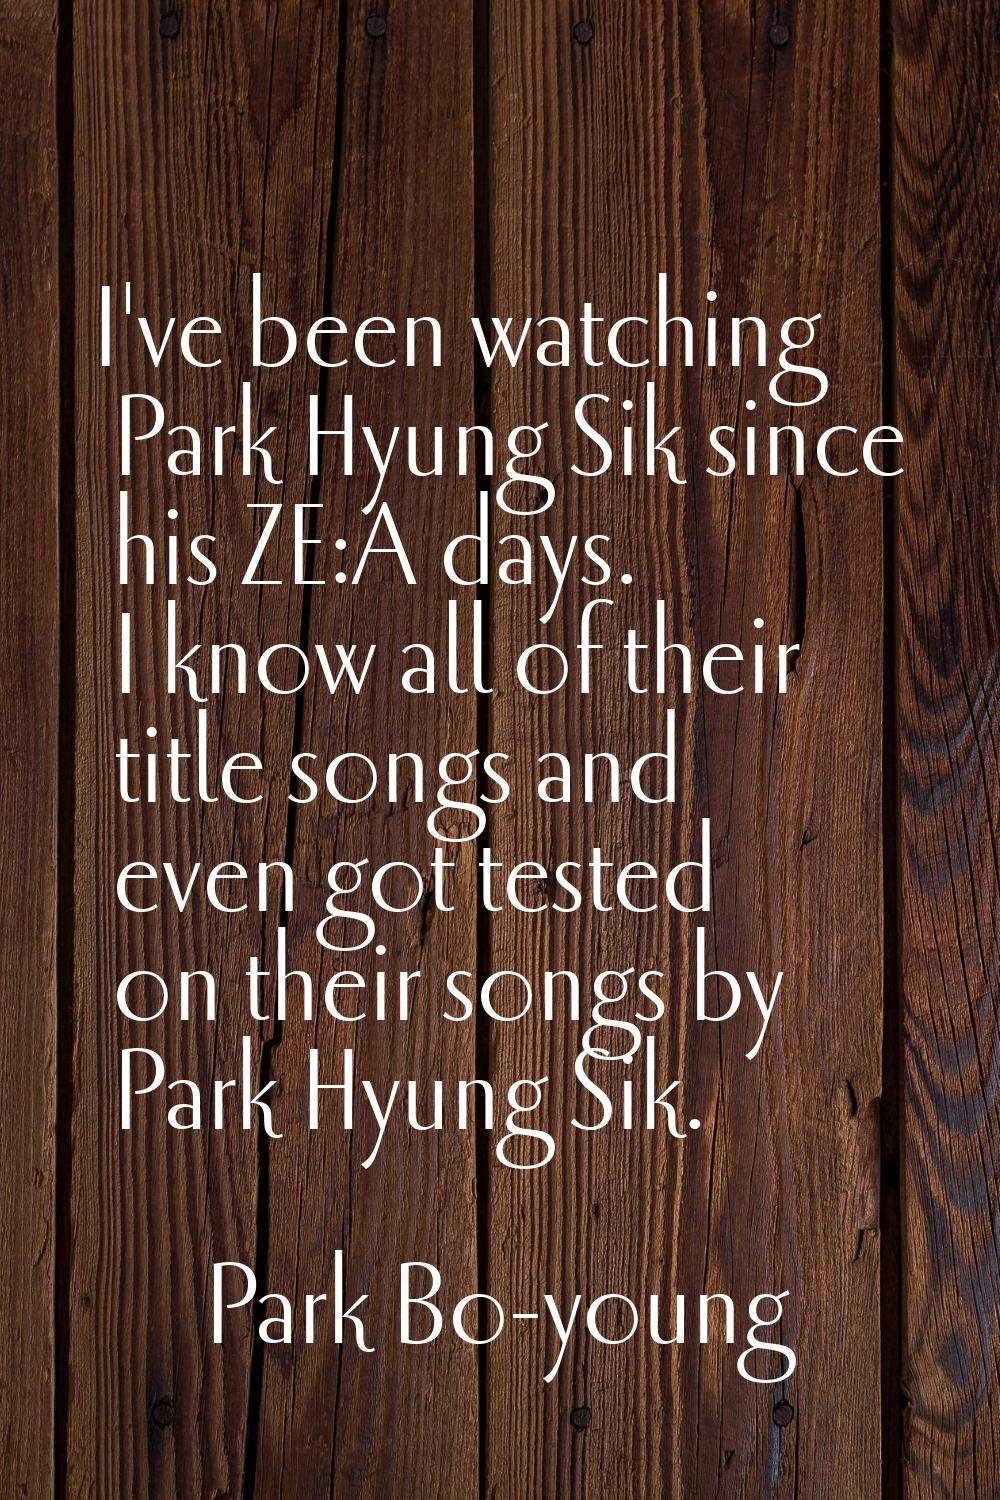 I've been watching Park Hyung Sik since his ZE:A days. I know all of their title songs and even got